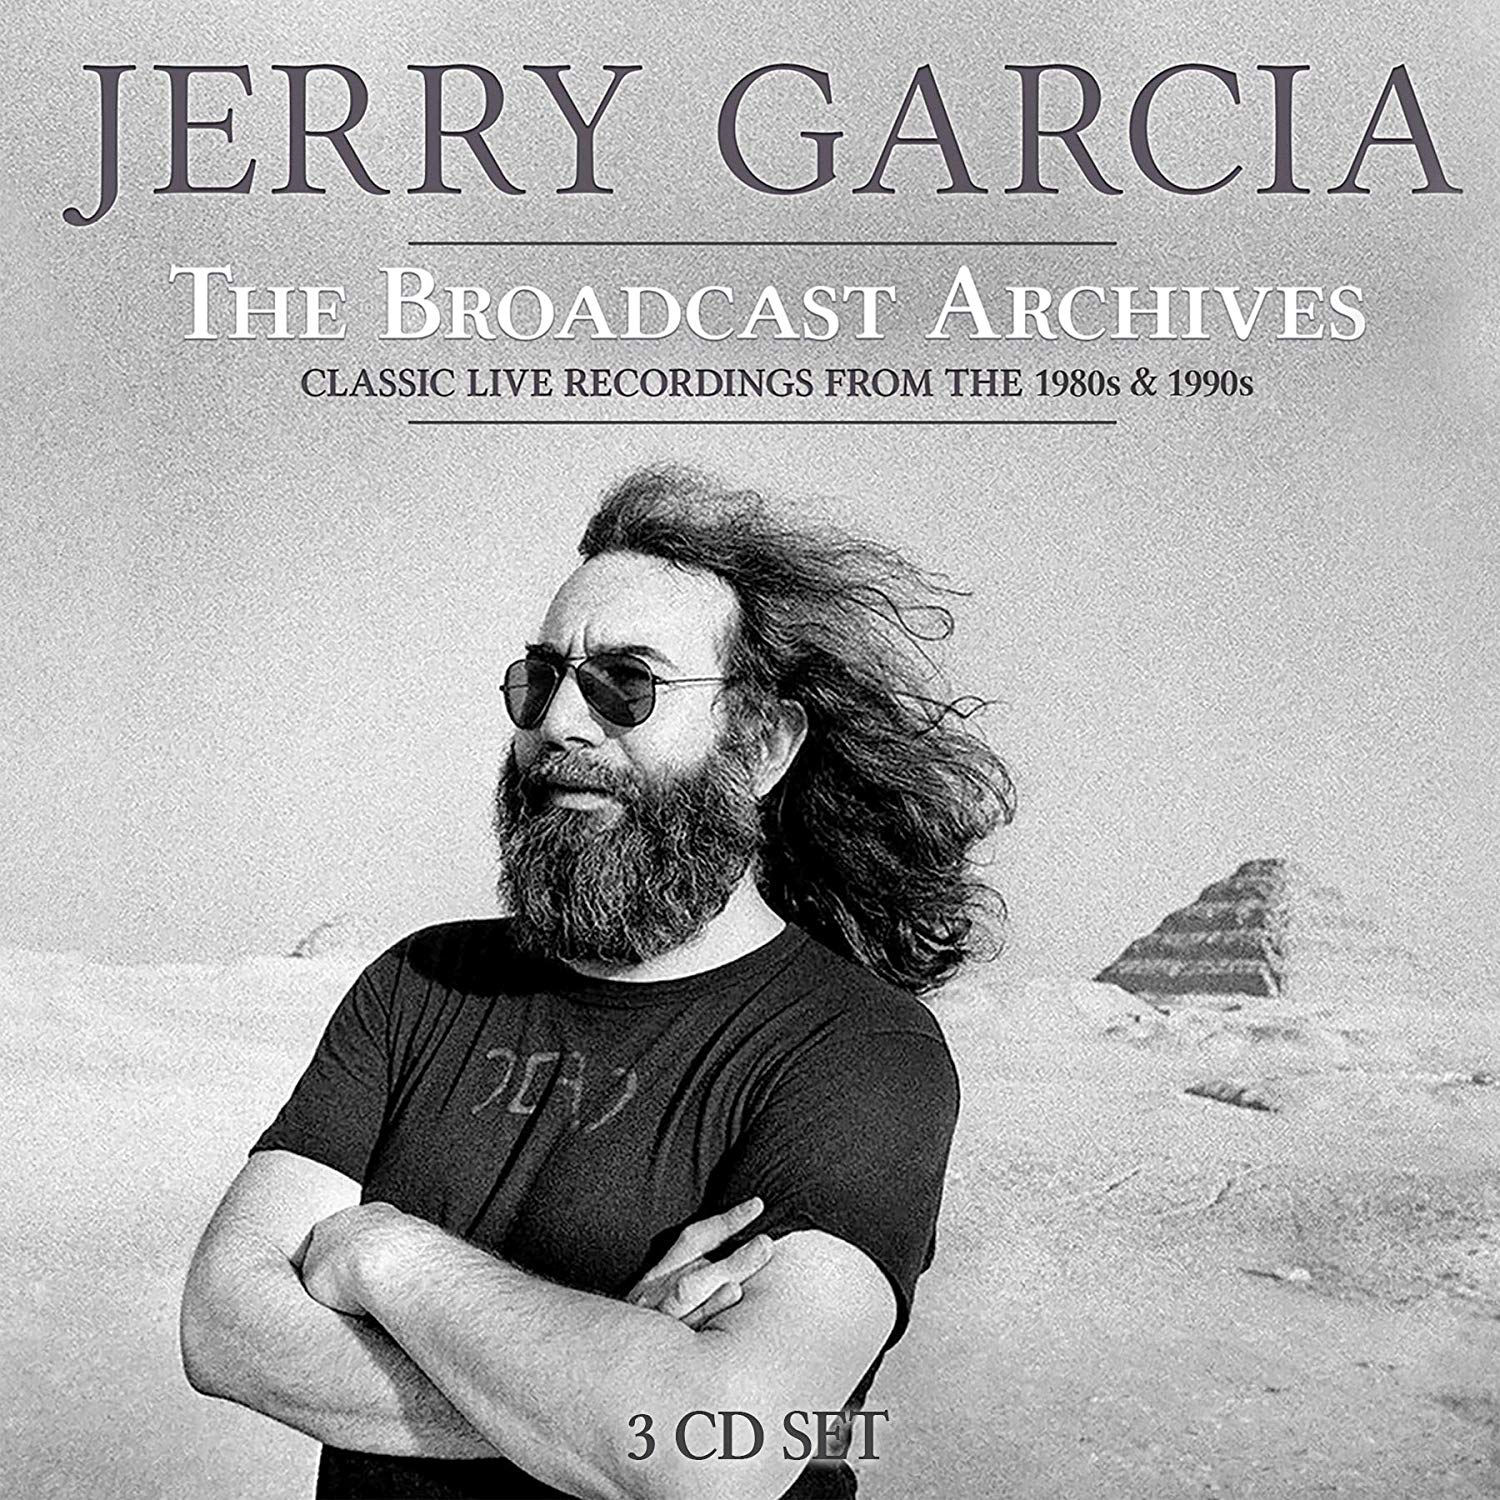 JERRY GARCIA / ジェリー・ガルシア / THE BROADCAST ARCHIVES (3CD)